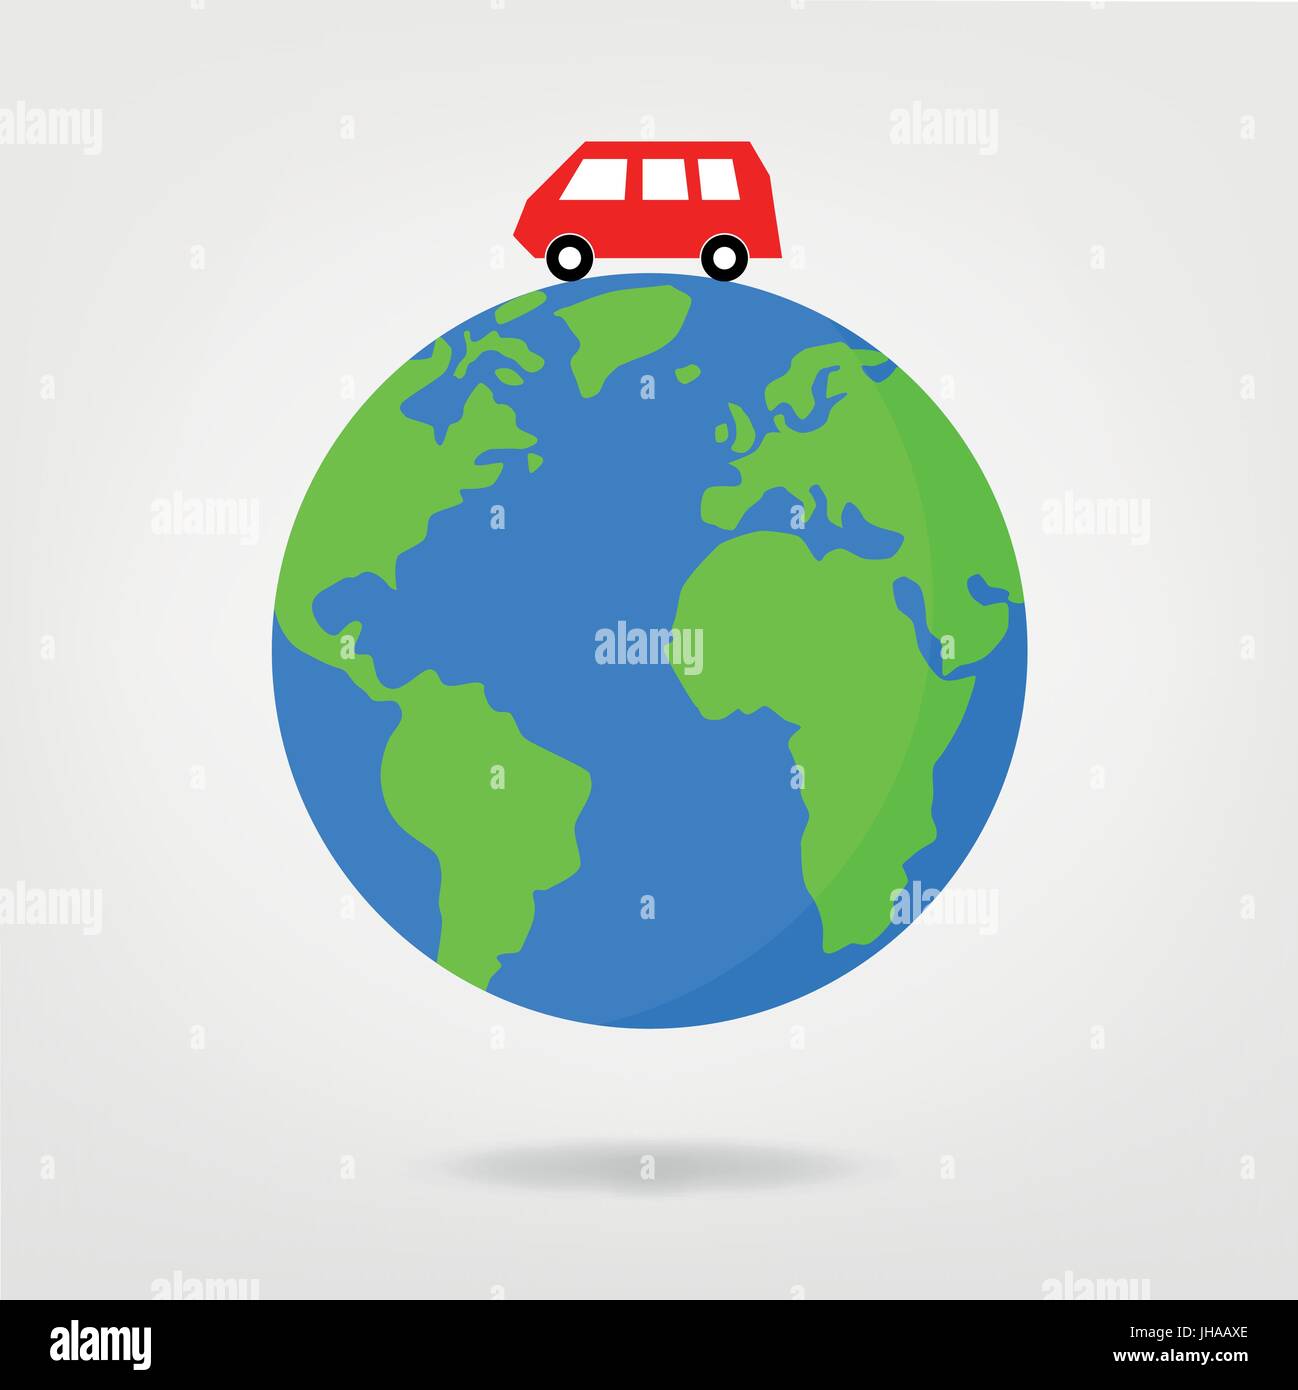 travel by bus around the world - vector graphic Stock Photo